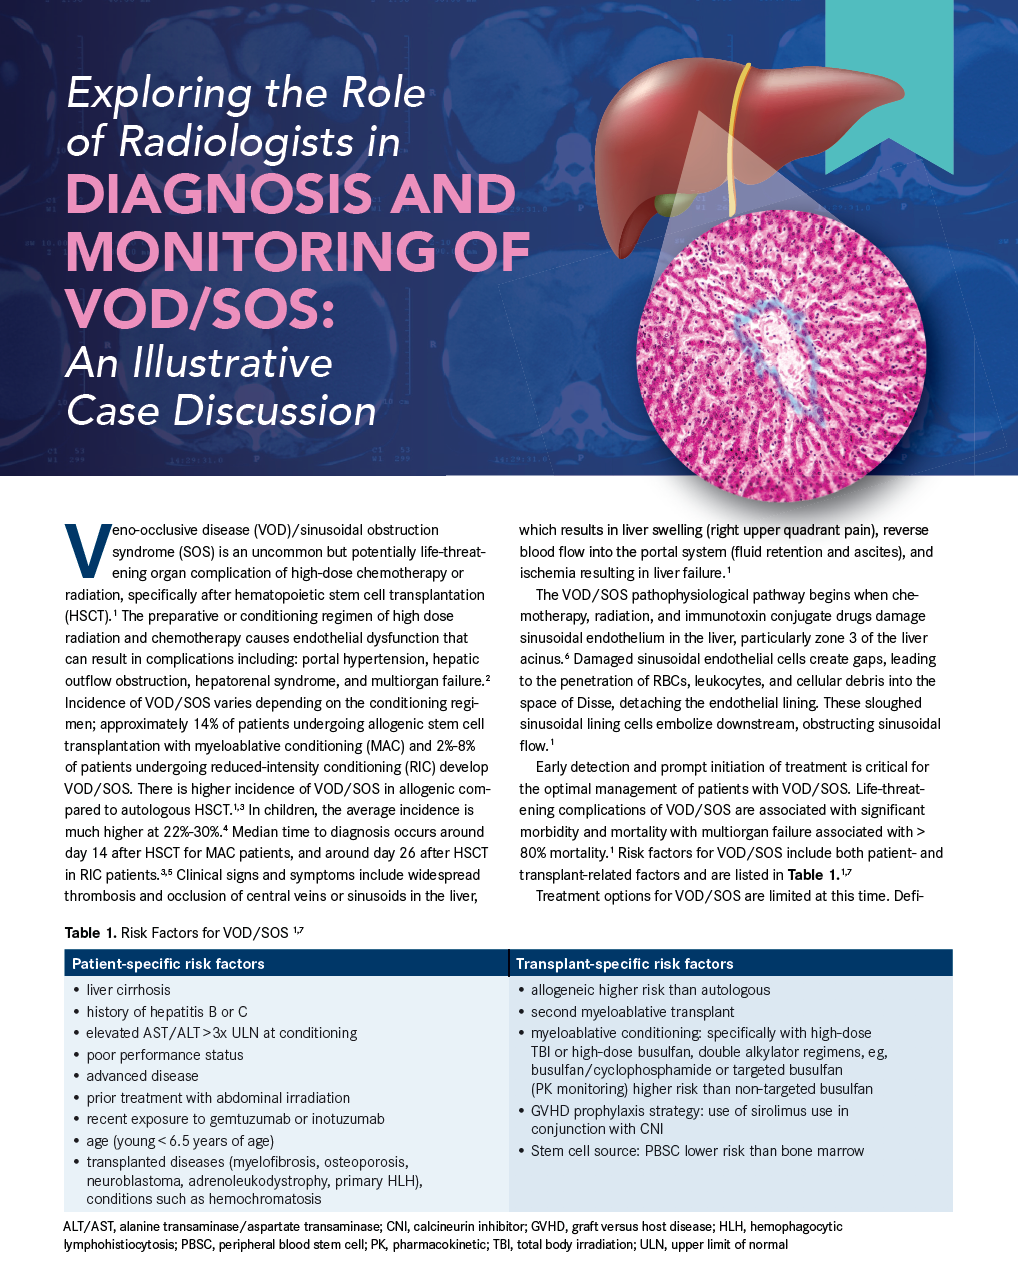 Exploring the Role of Radiologists in Diagnosis and Monitoring of VOD/SOS: An Illustrative Case Discussion